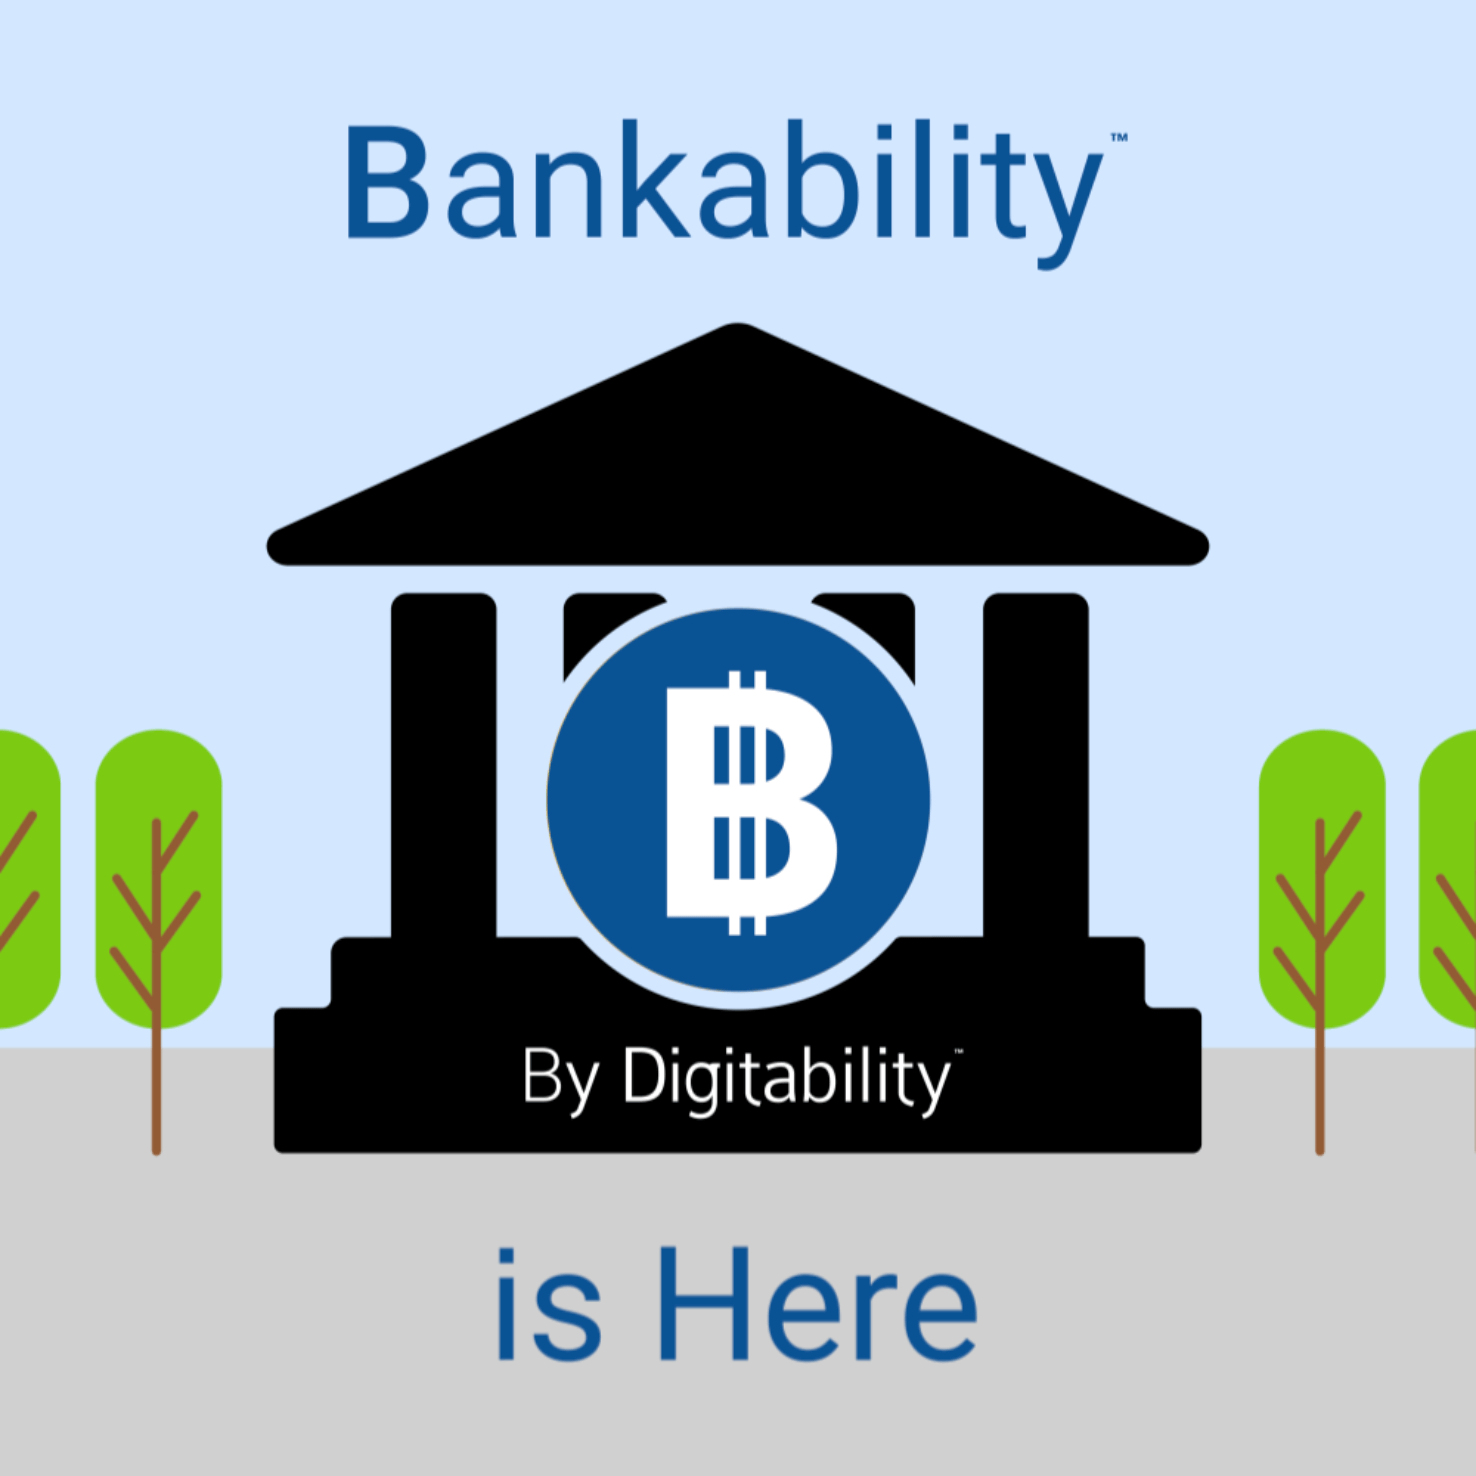 Bring Bankability to your school for as low as $499!